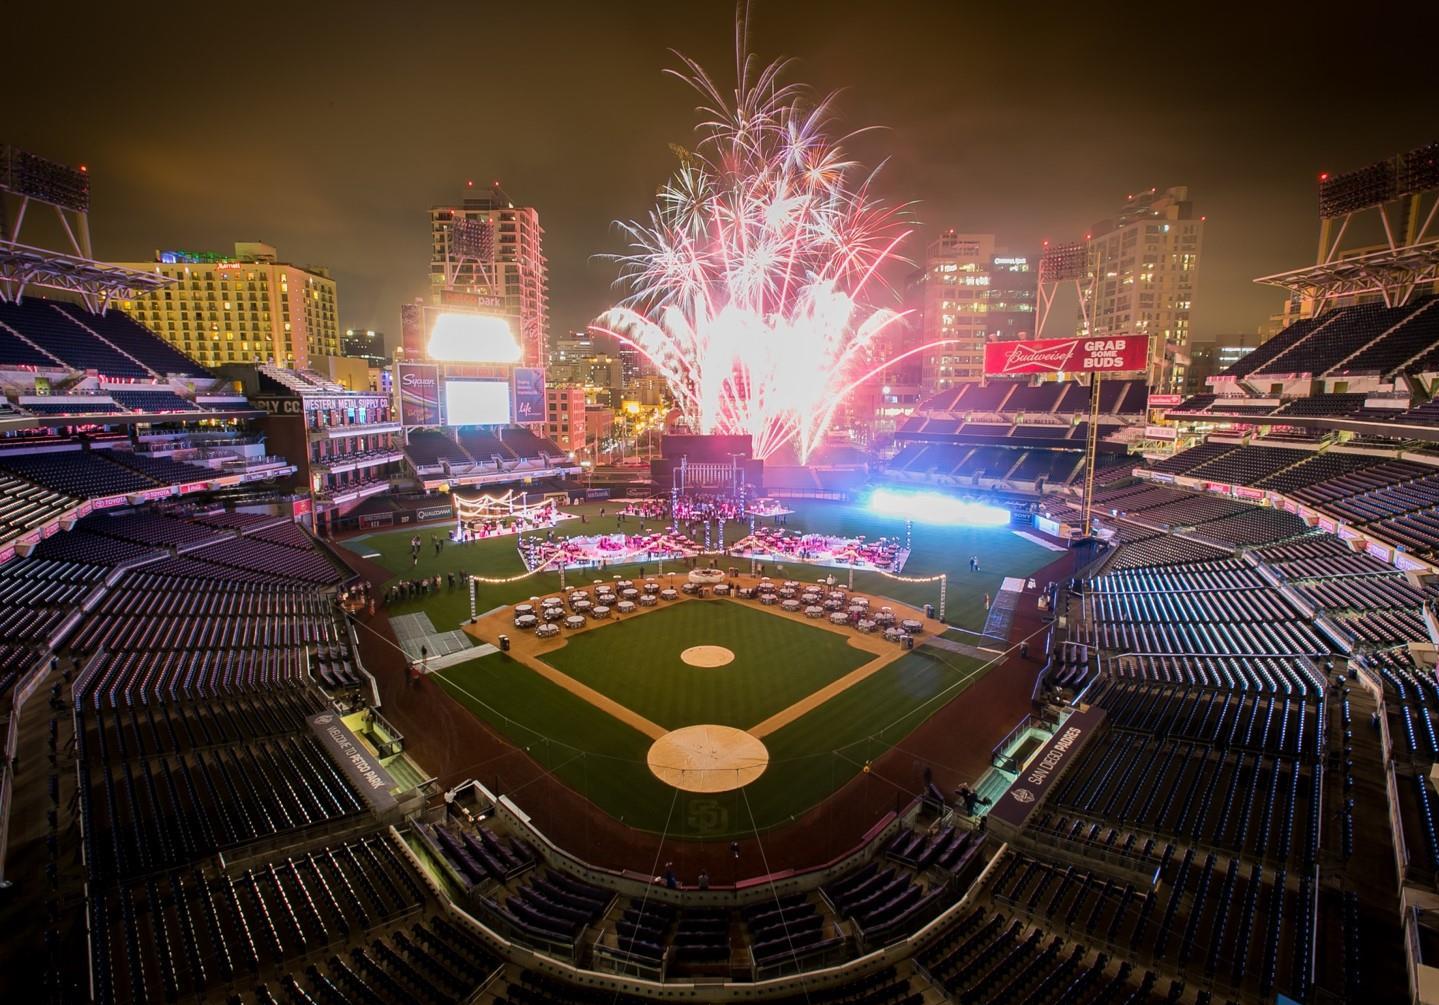 PETCO Park The Official Travel Resource for the San Diego Region